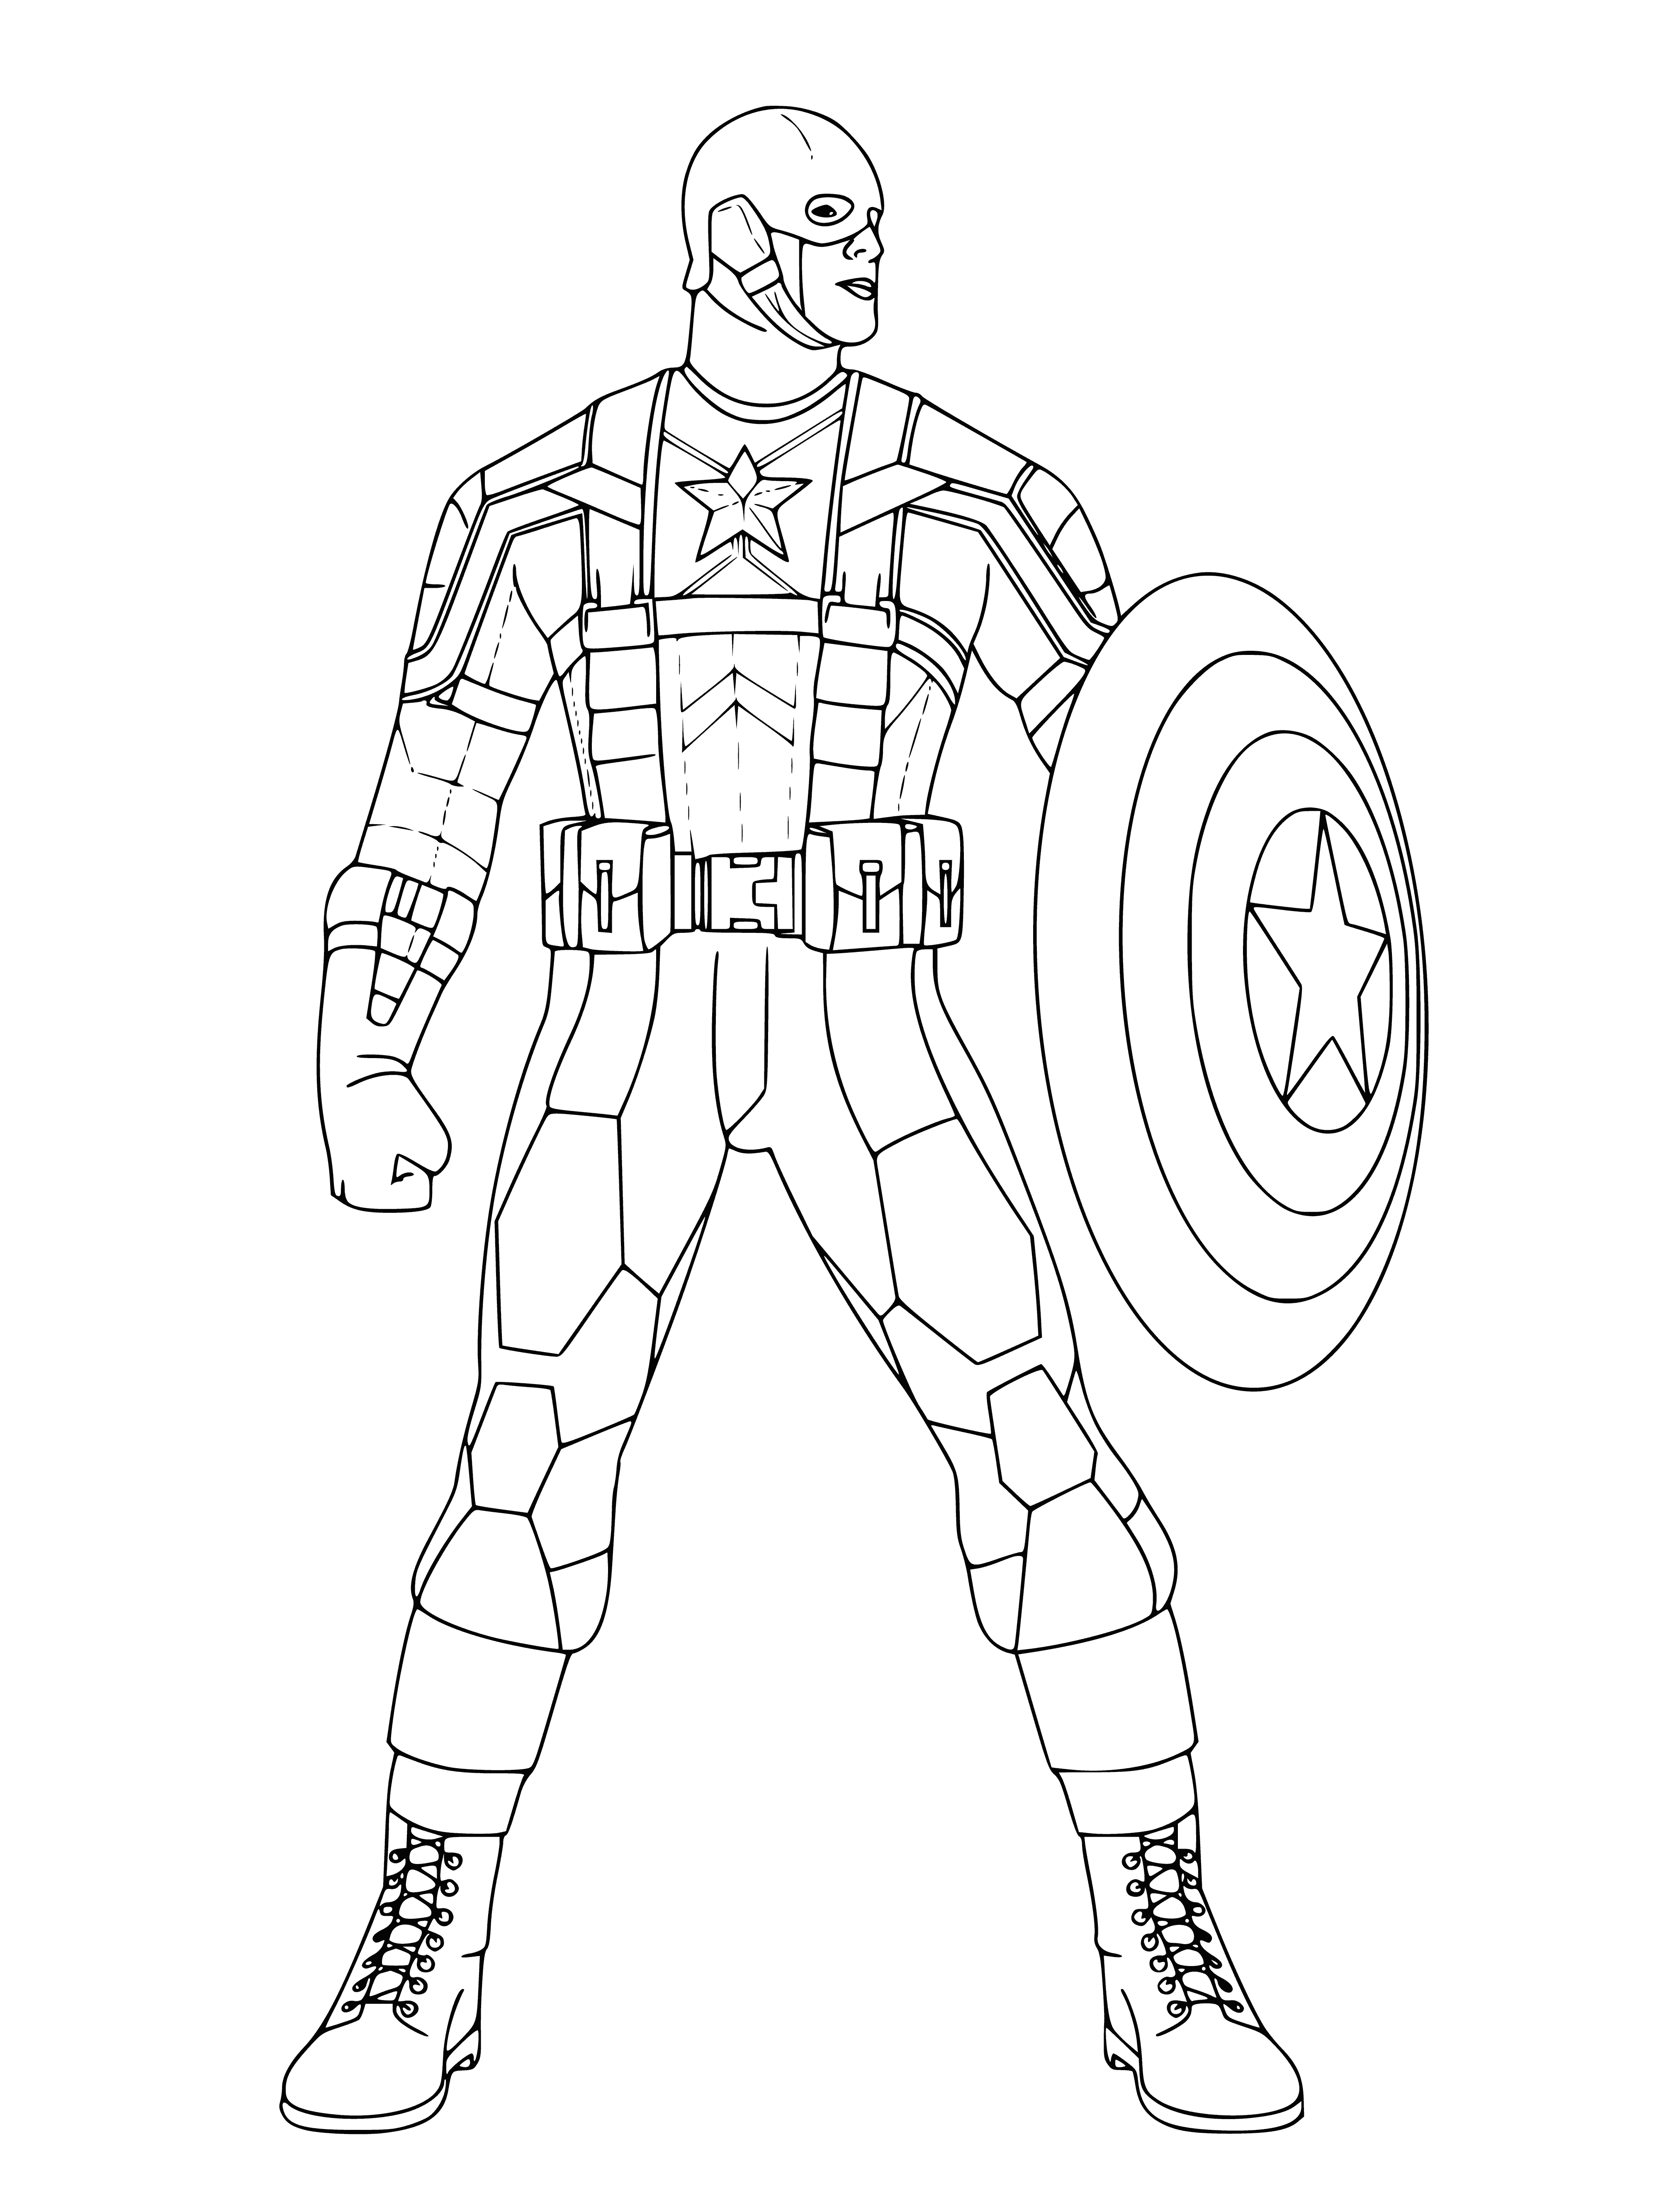 coloring page: Captain America is Marvel's superhero with Muscular frame, red-white-blue costume & shield, who fights for justice w/ blue eyes.